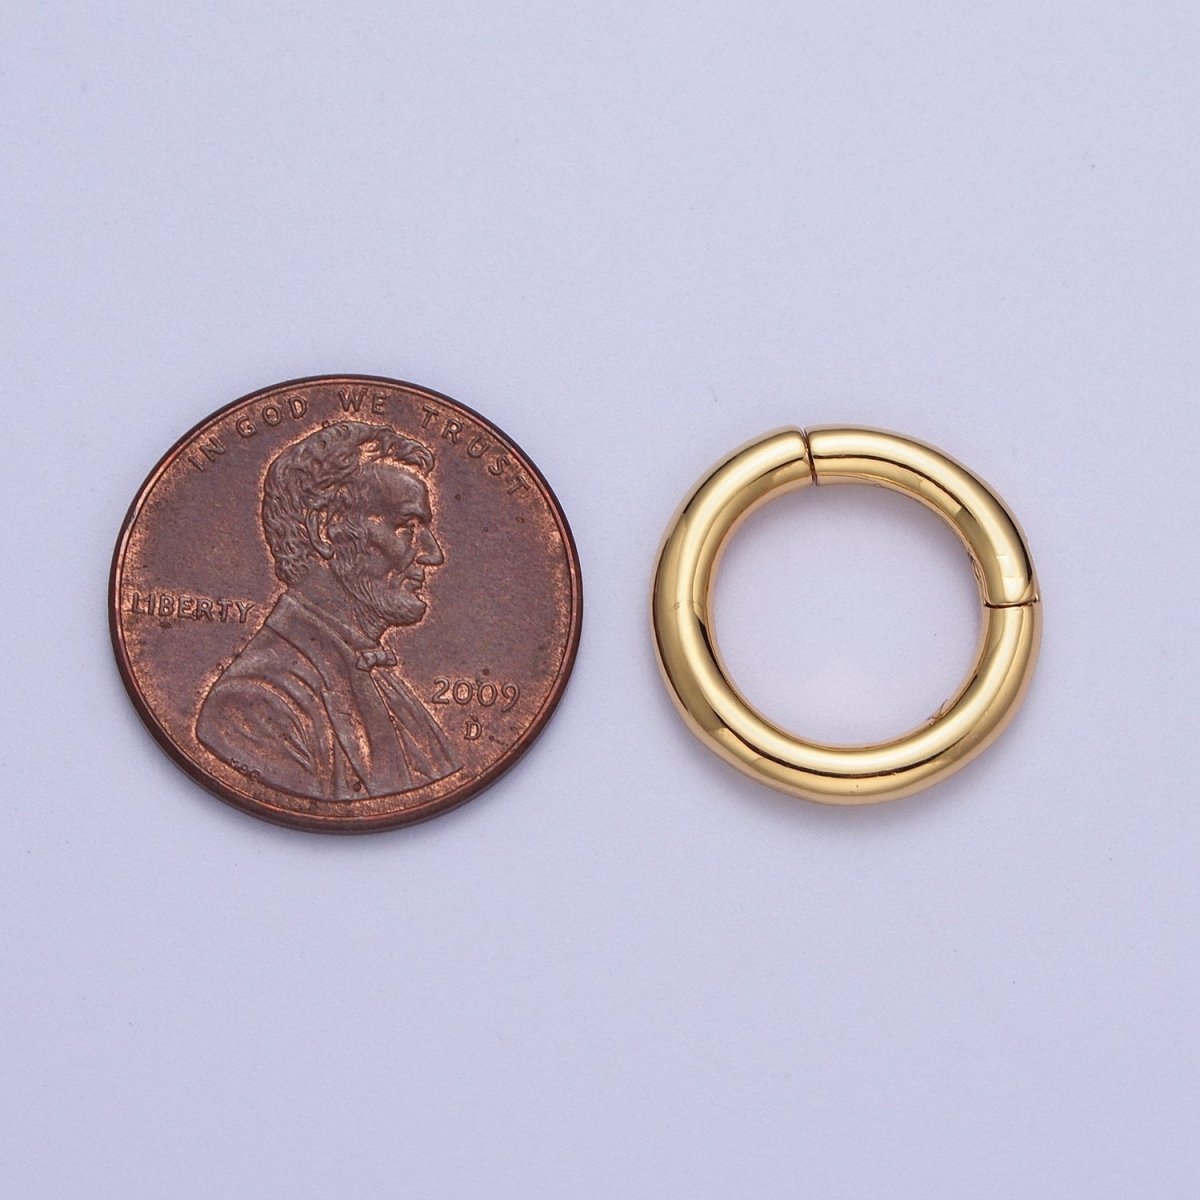 24K Gold Filled Minimalist Spring Gate Ring Findings For Jewelry Making L-933 L-934 - DLUXCA